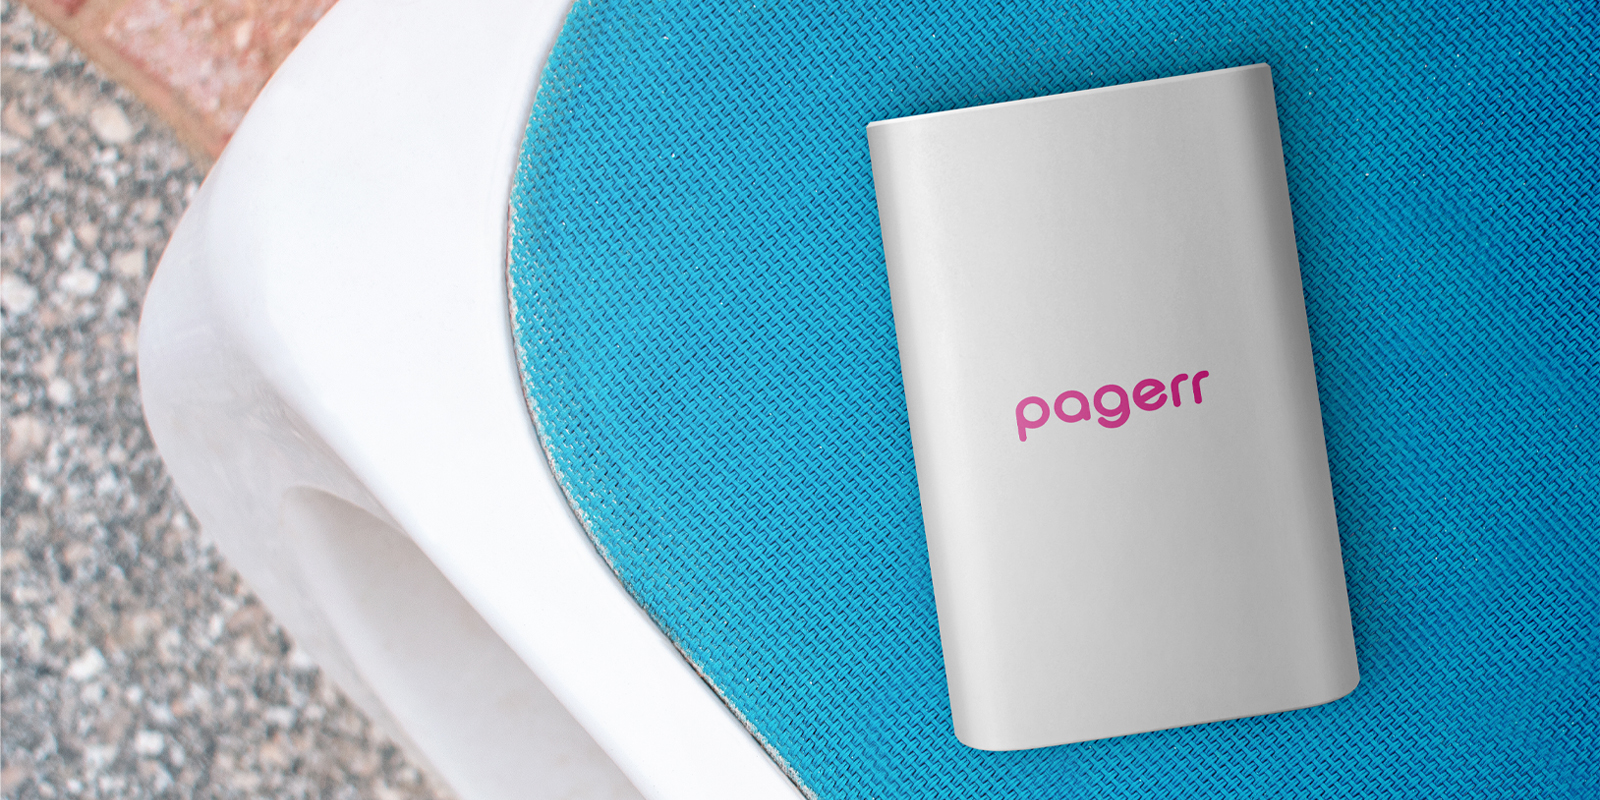 Chargers & power banks in Canberra - Print with Pagerr